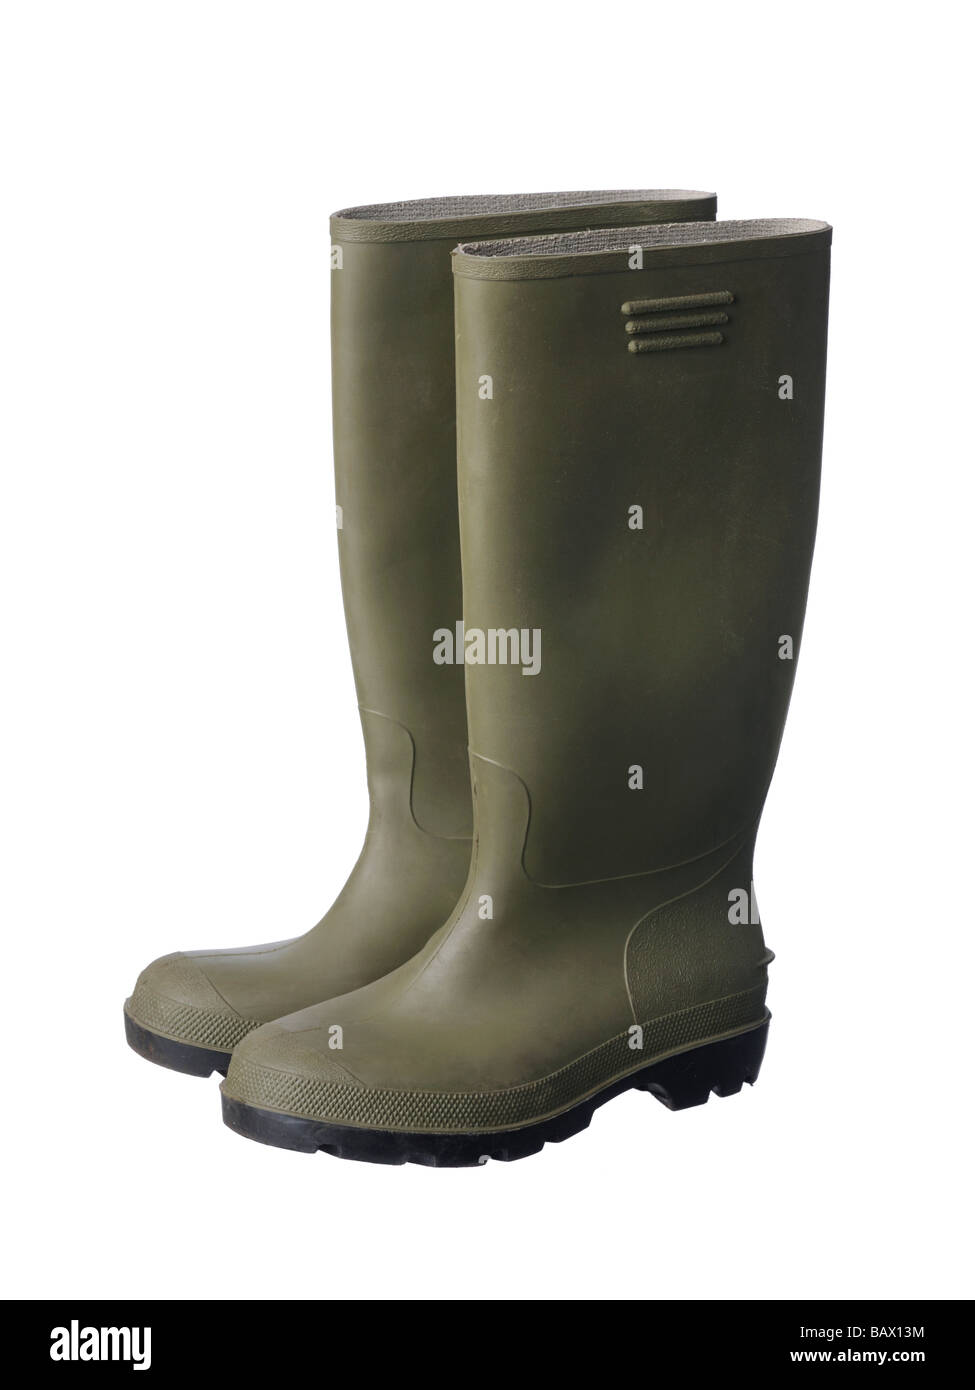 Wellies rubber boots Stock Photo